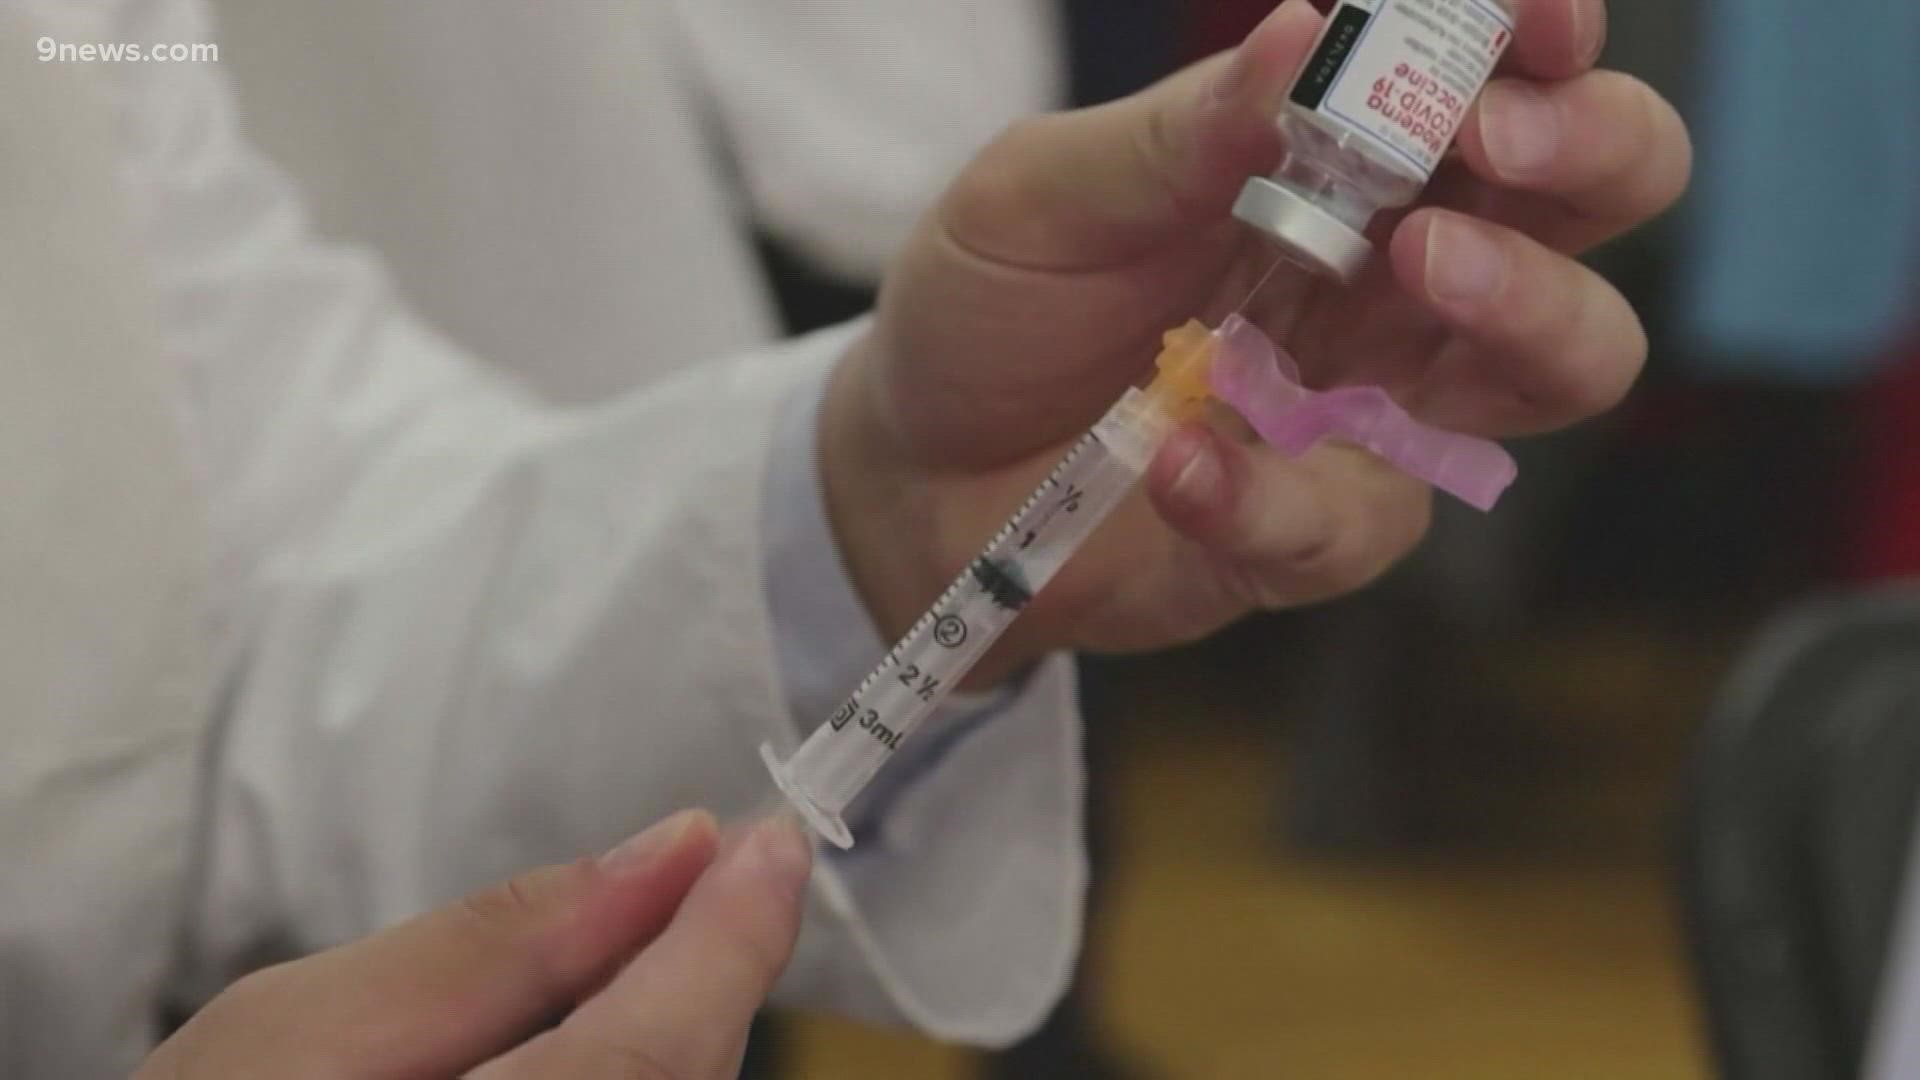 Health officials are working to make sure everyone who got their first dose is fully vaccinated.